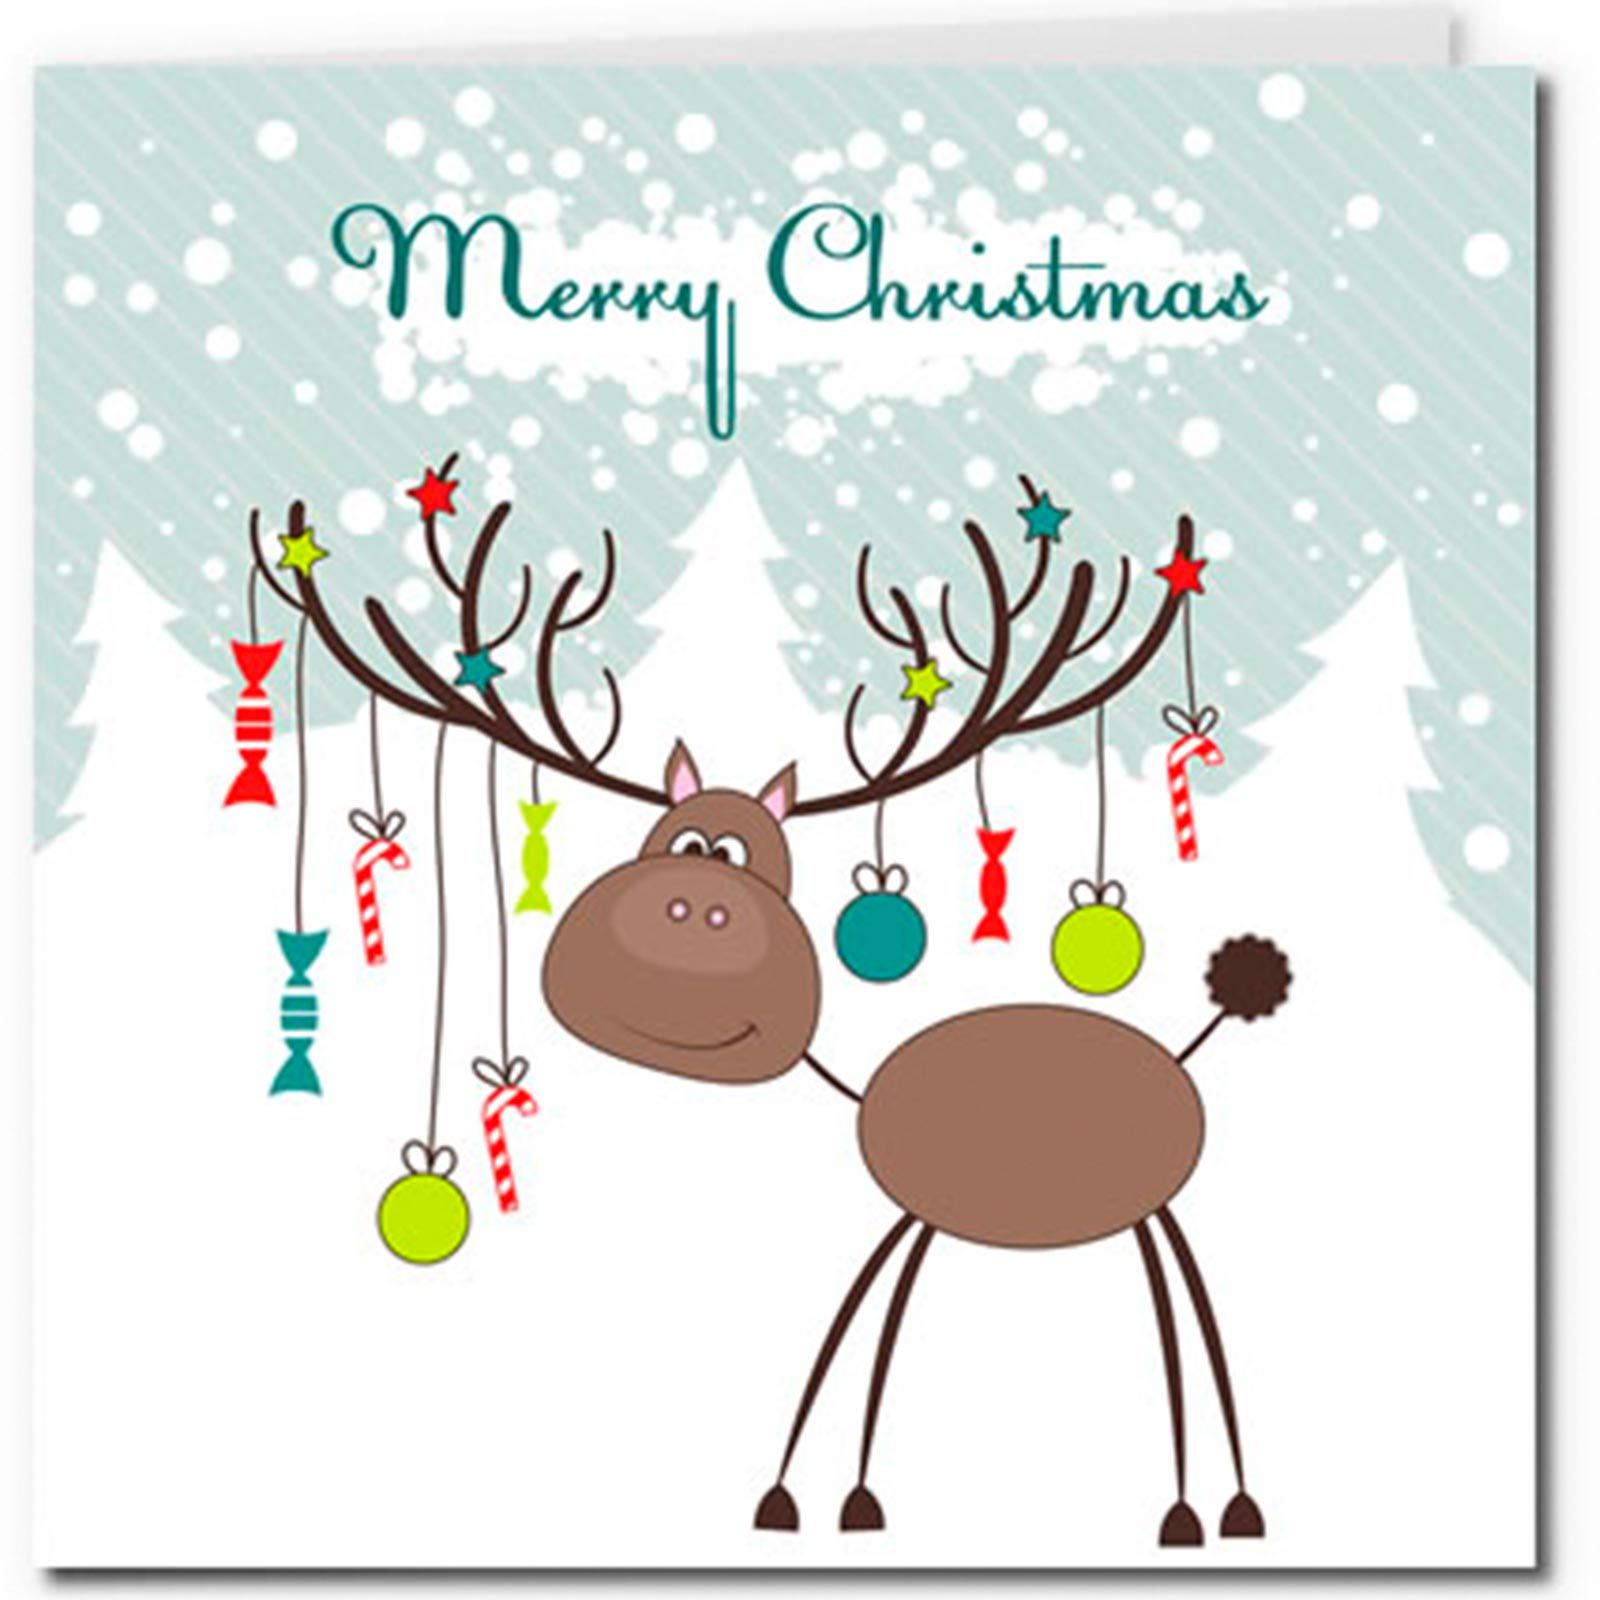 Free Christmas Cards To Print Out And Send This Year Reader s Digest